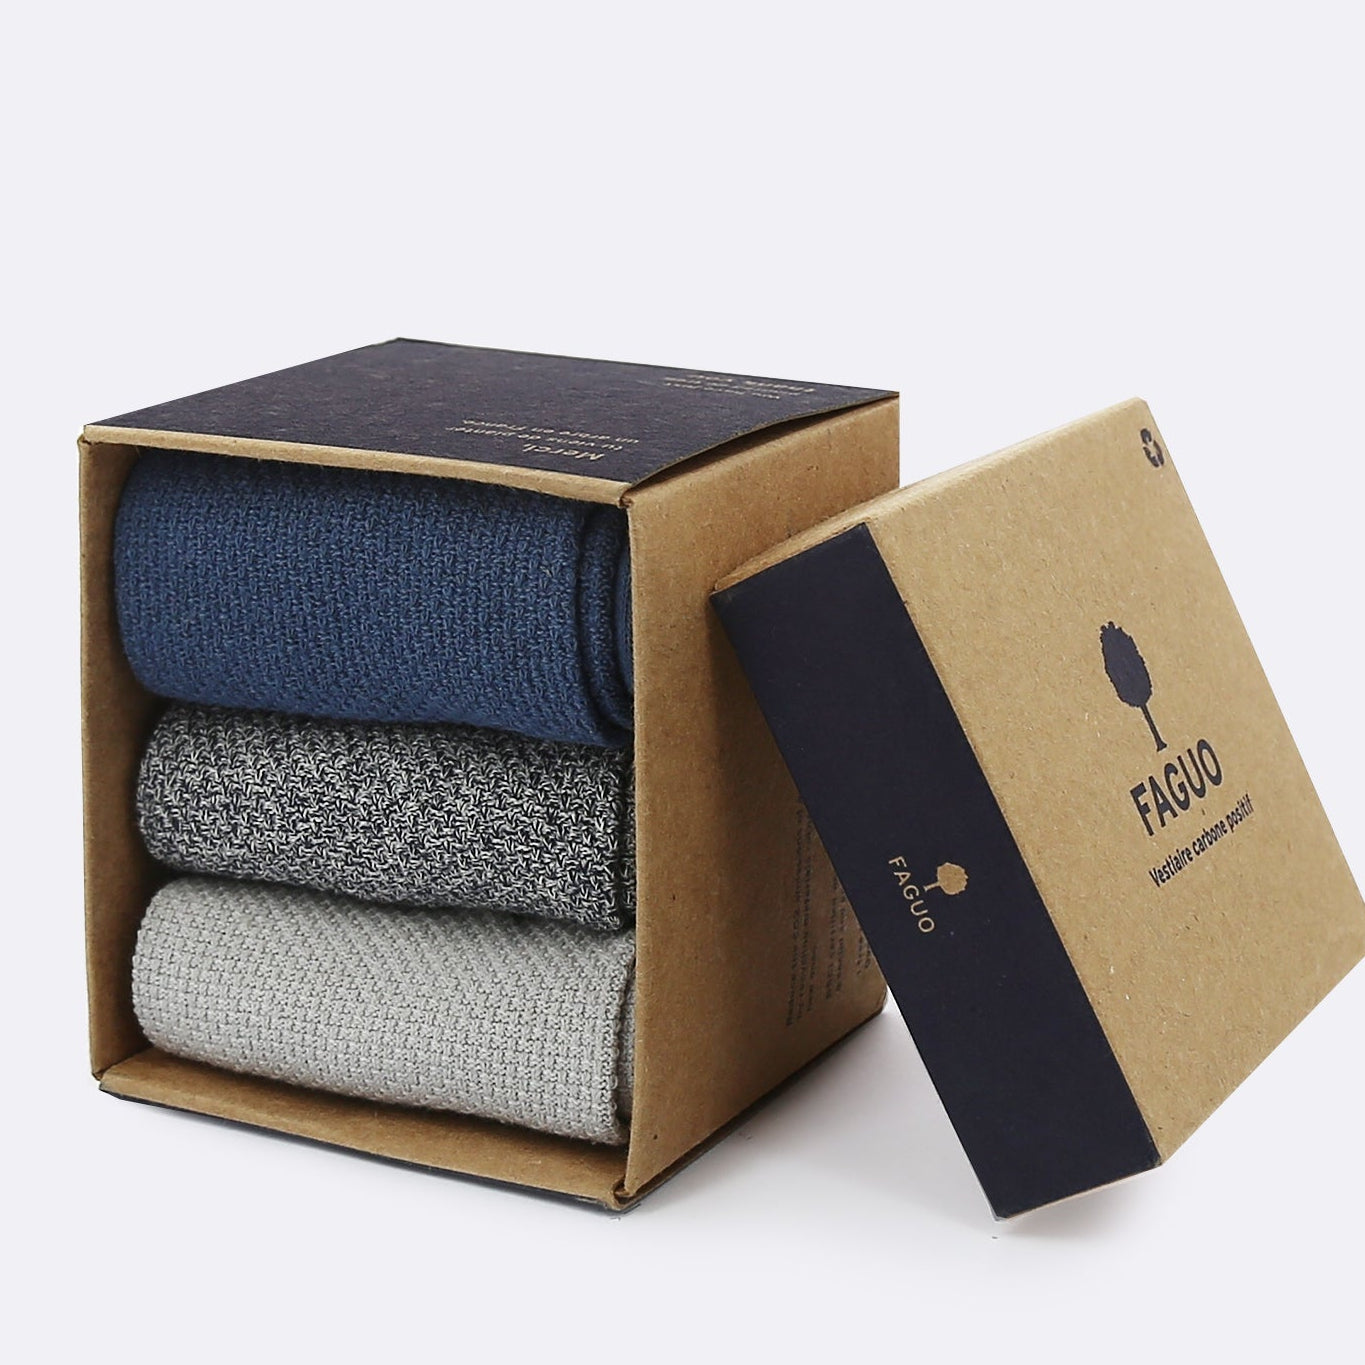 Faguo - Set of 3X Socks - Blue, Grey and Beige - The Good Chic